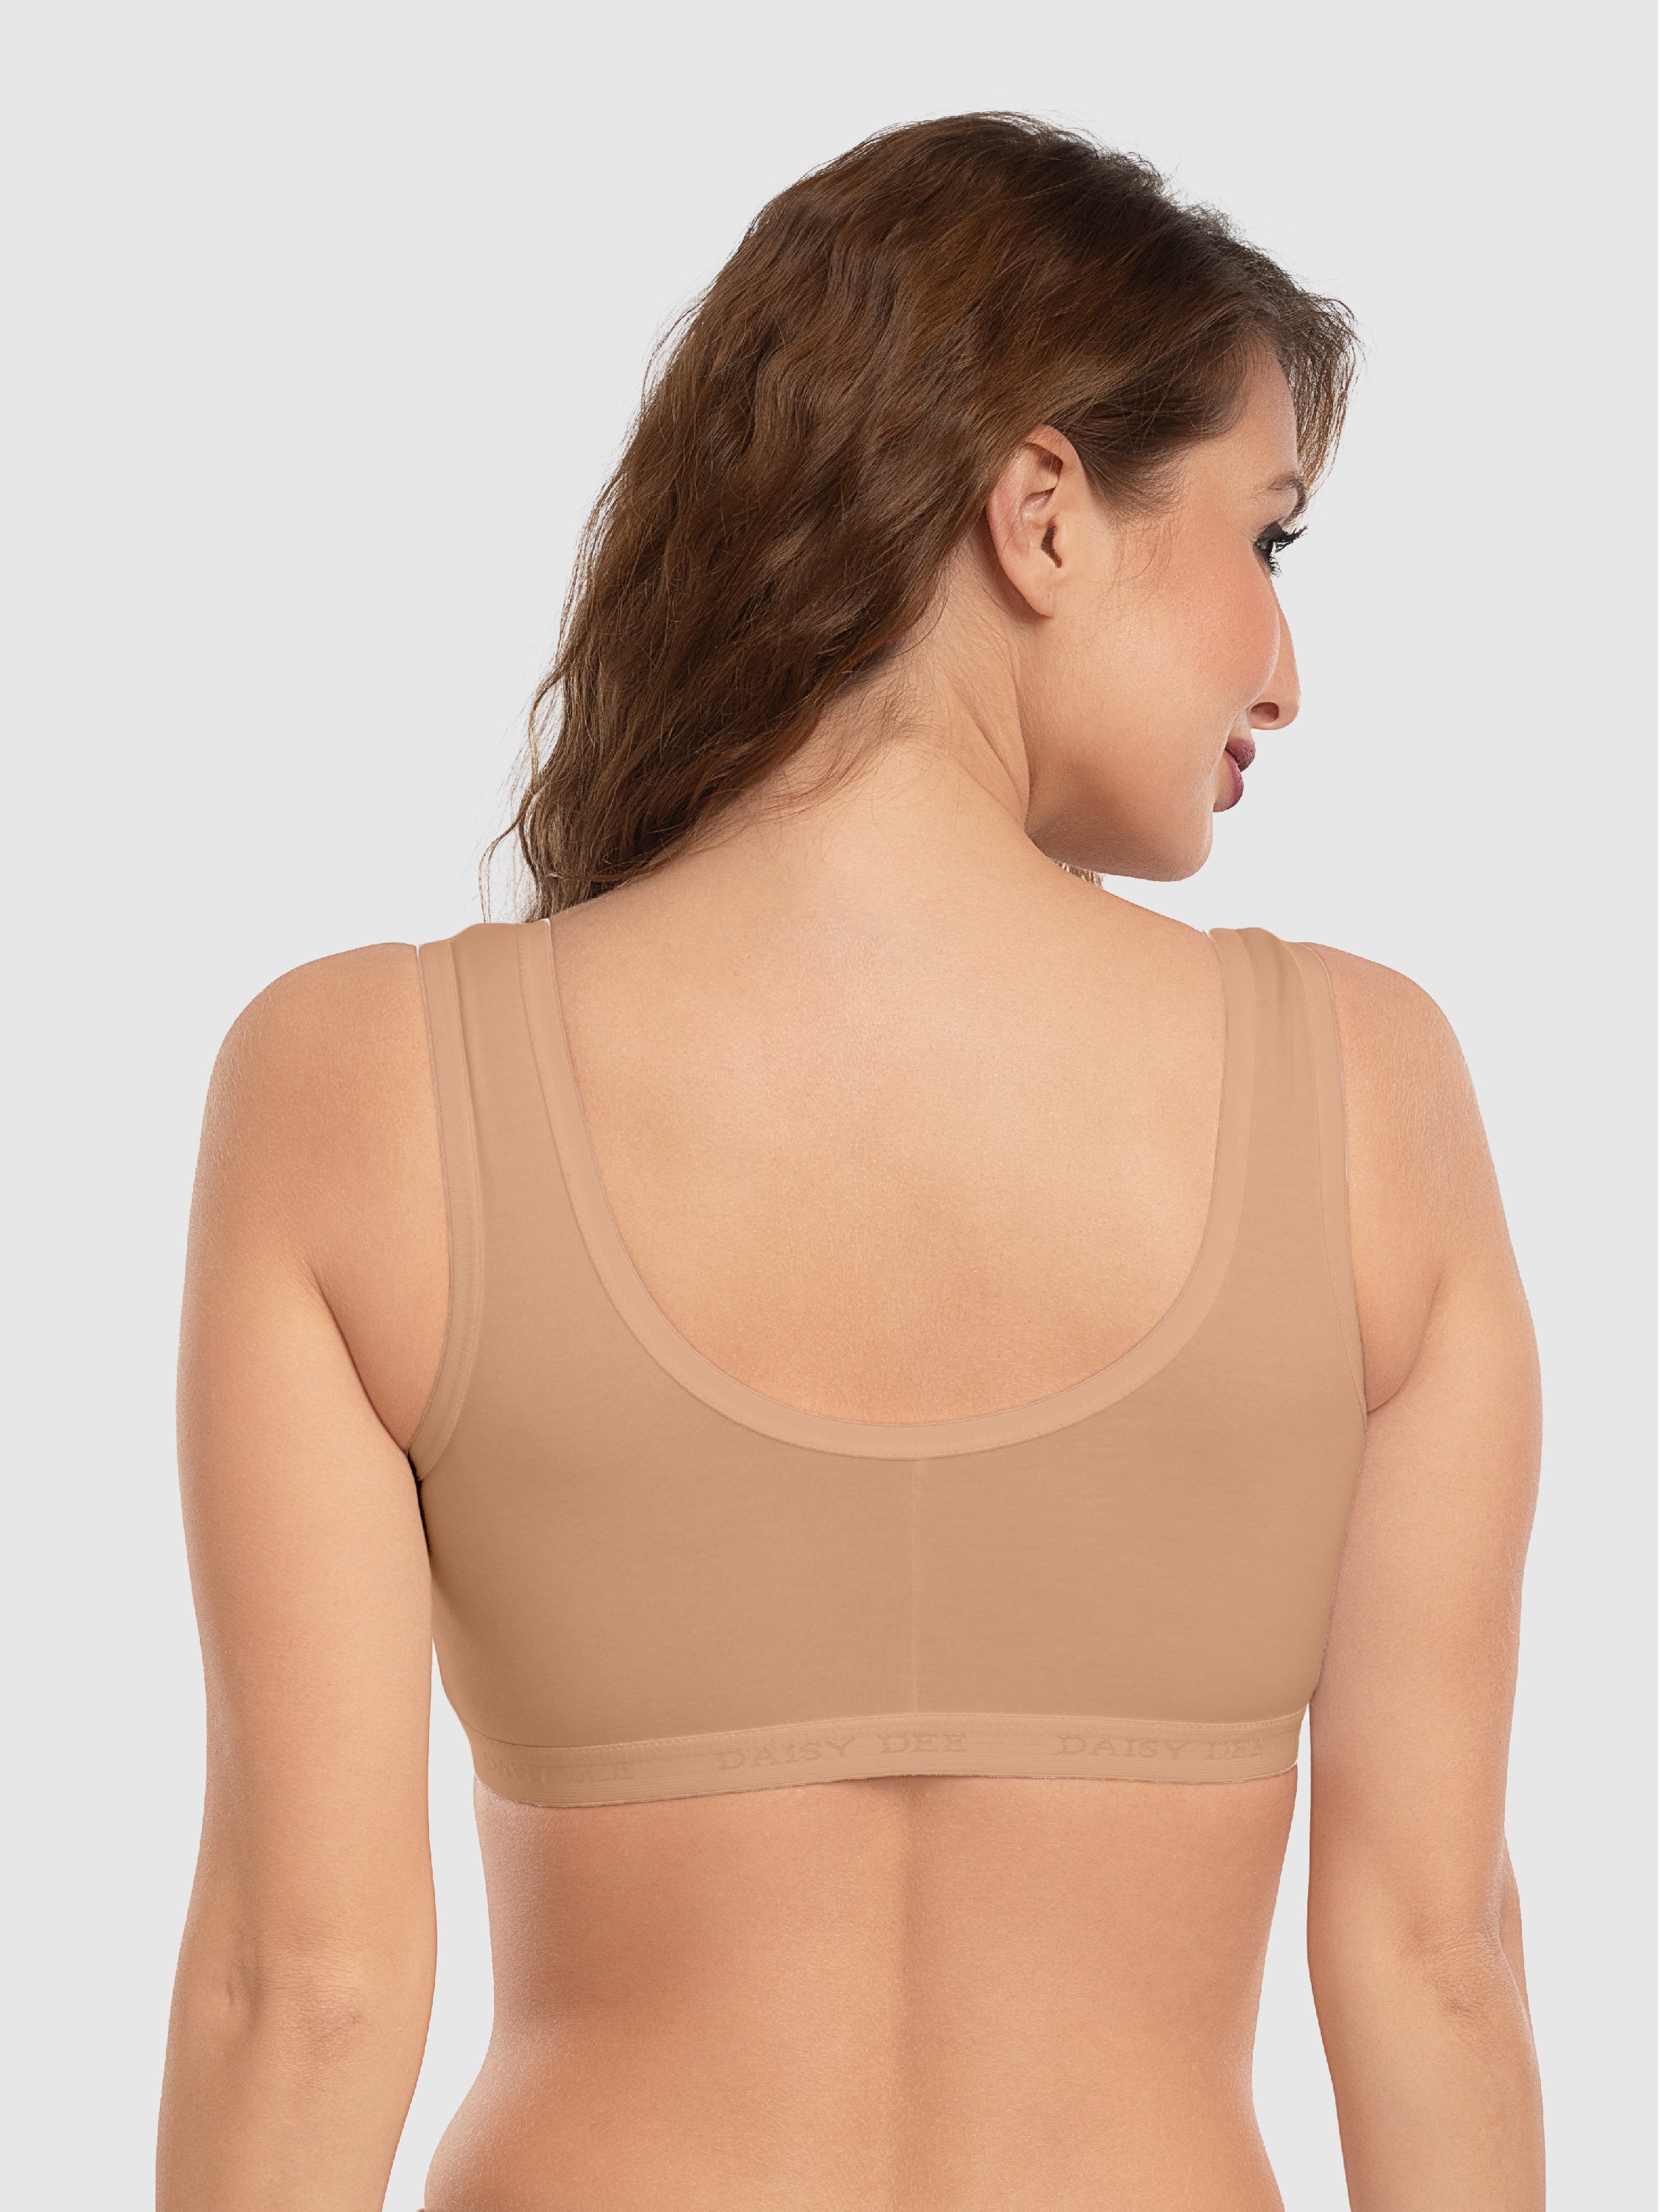 Daisy Dee Beige Non Padded Non Wired Full Coverage Sports Bra NLRA-Beige